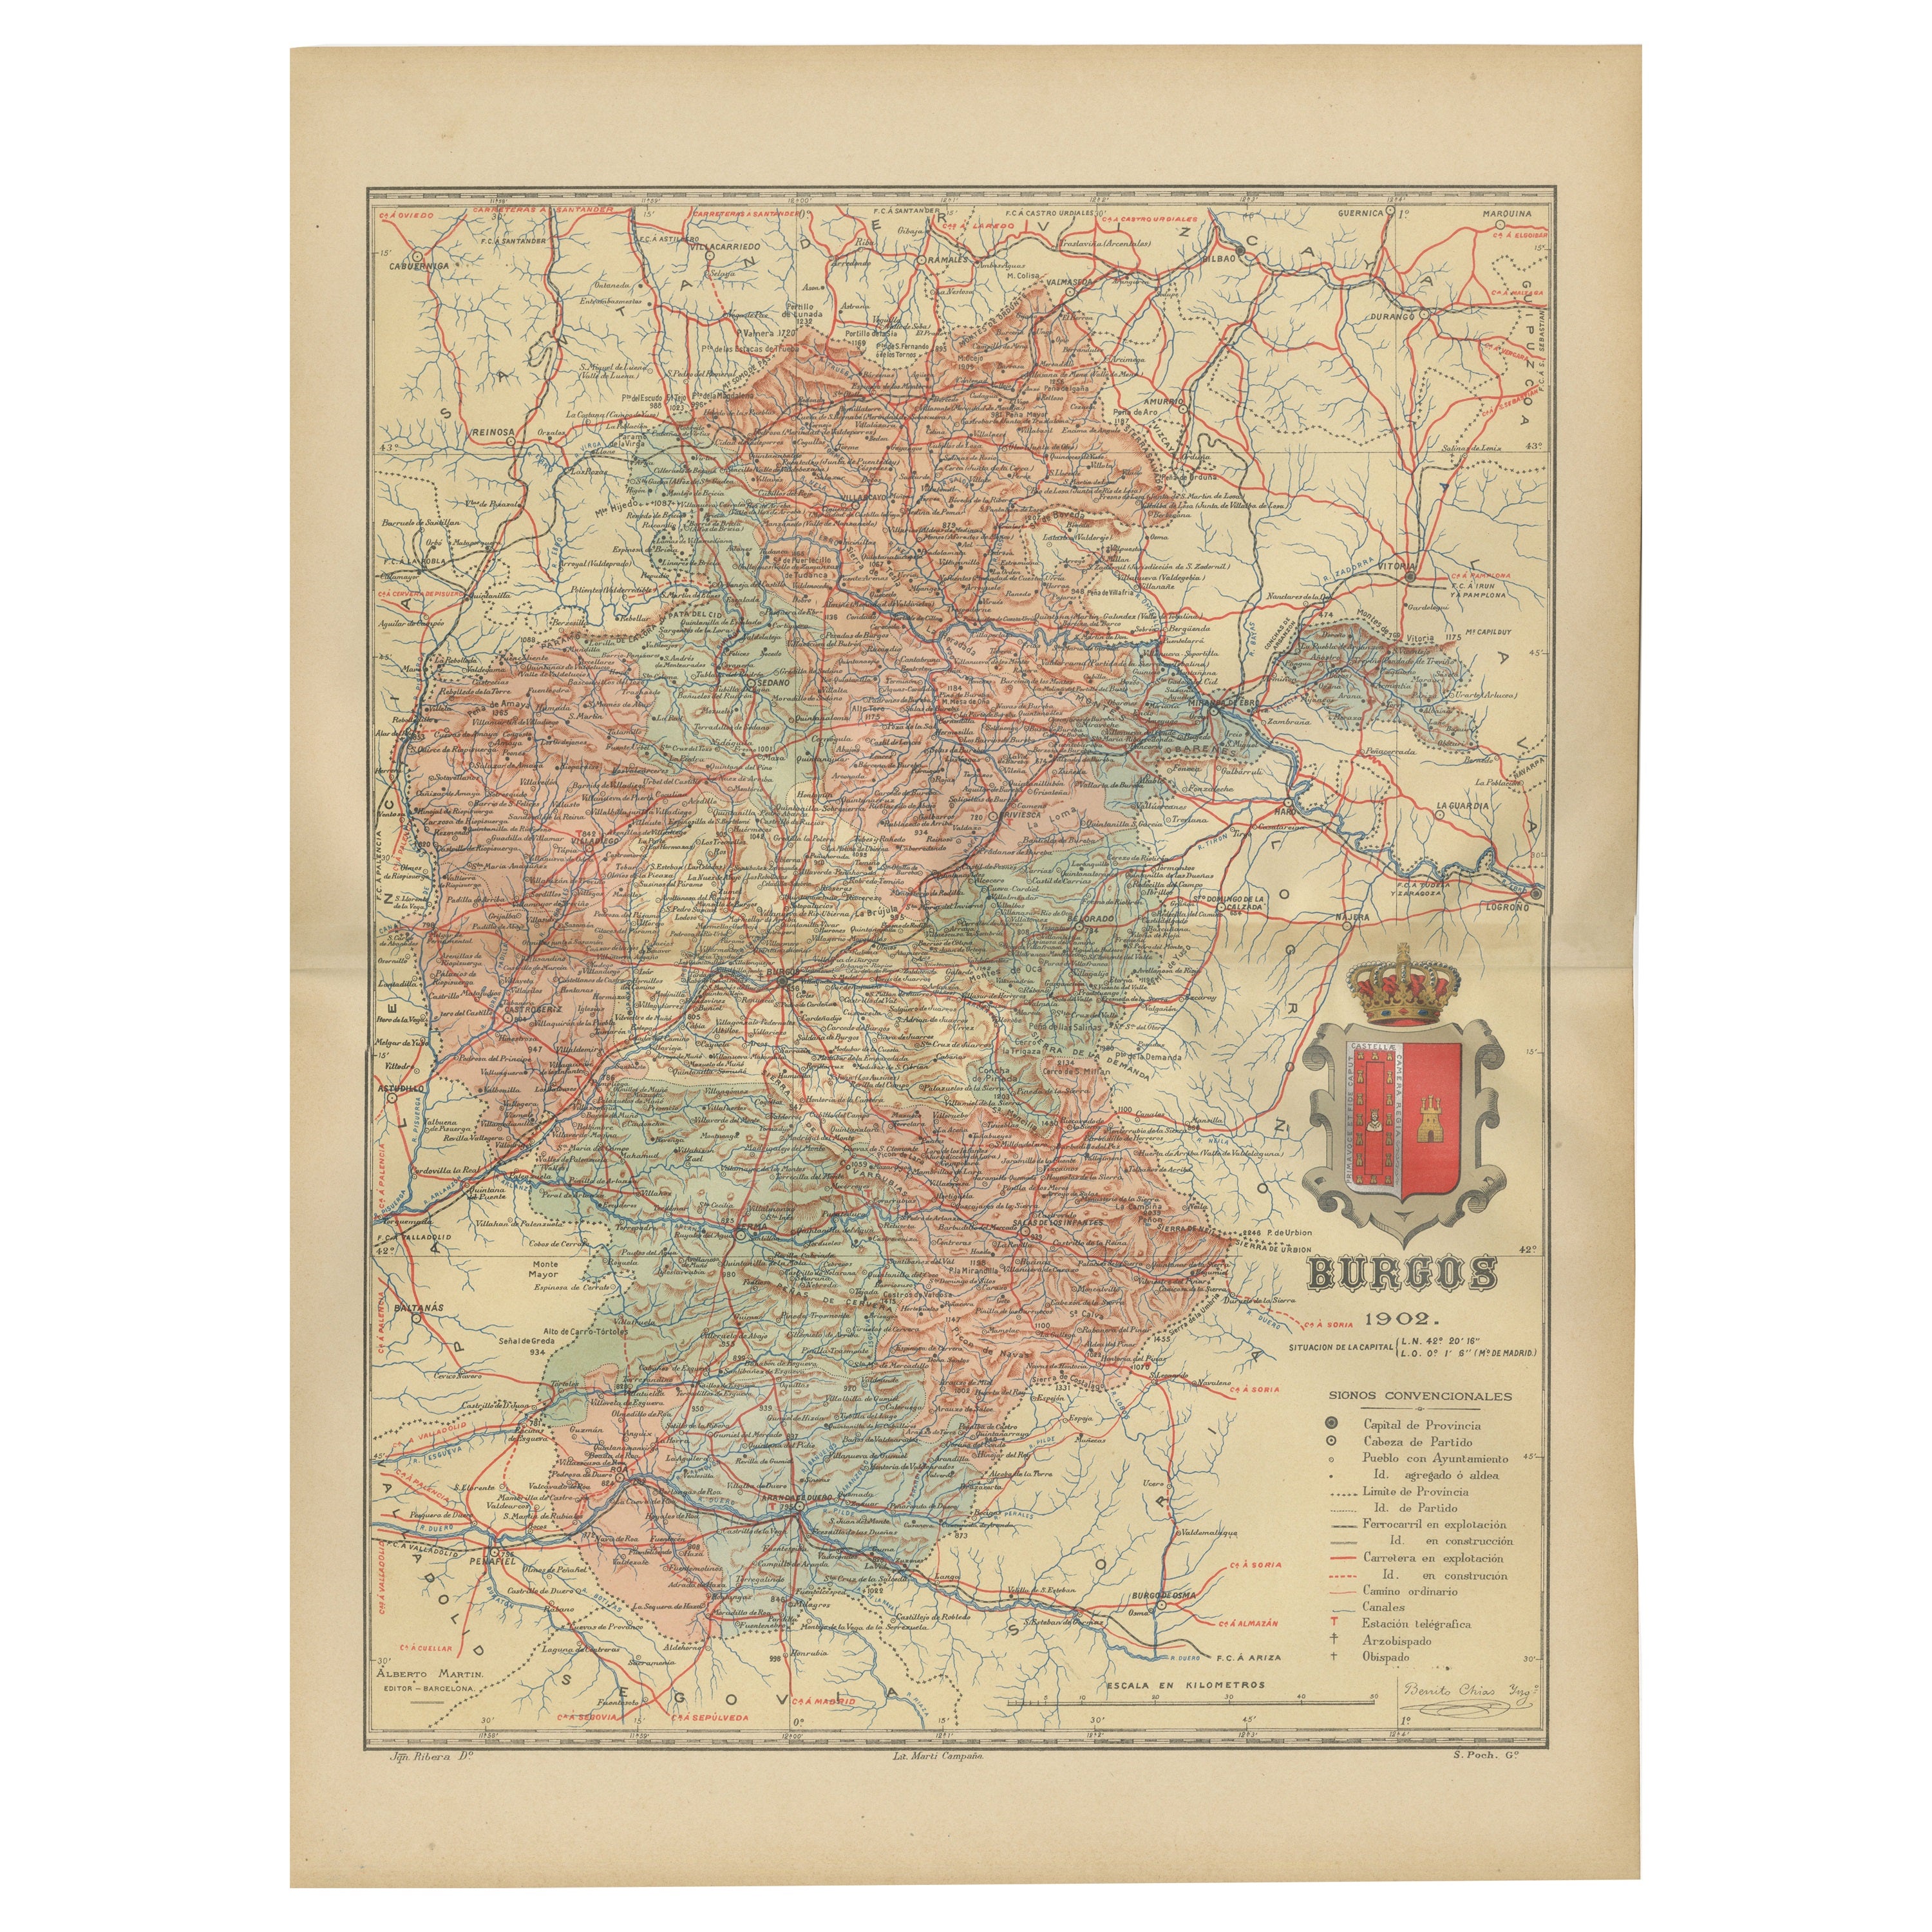 Burgos 1902: Geographic Map of Castile's Historic Heartland in Spain For Sale